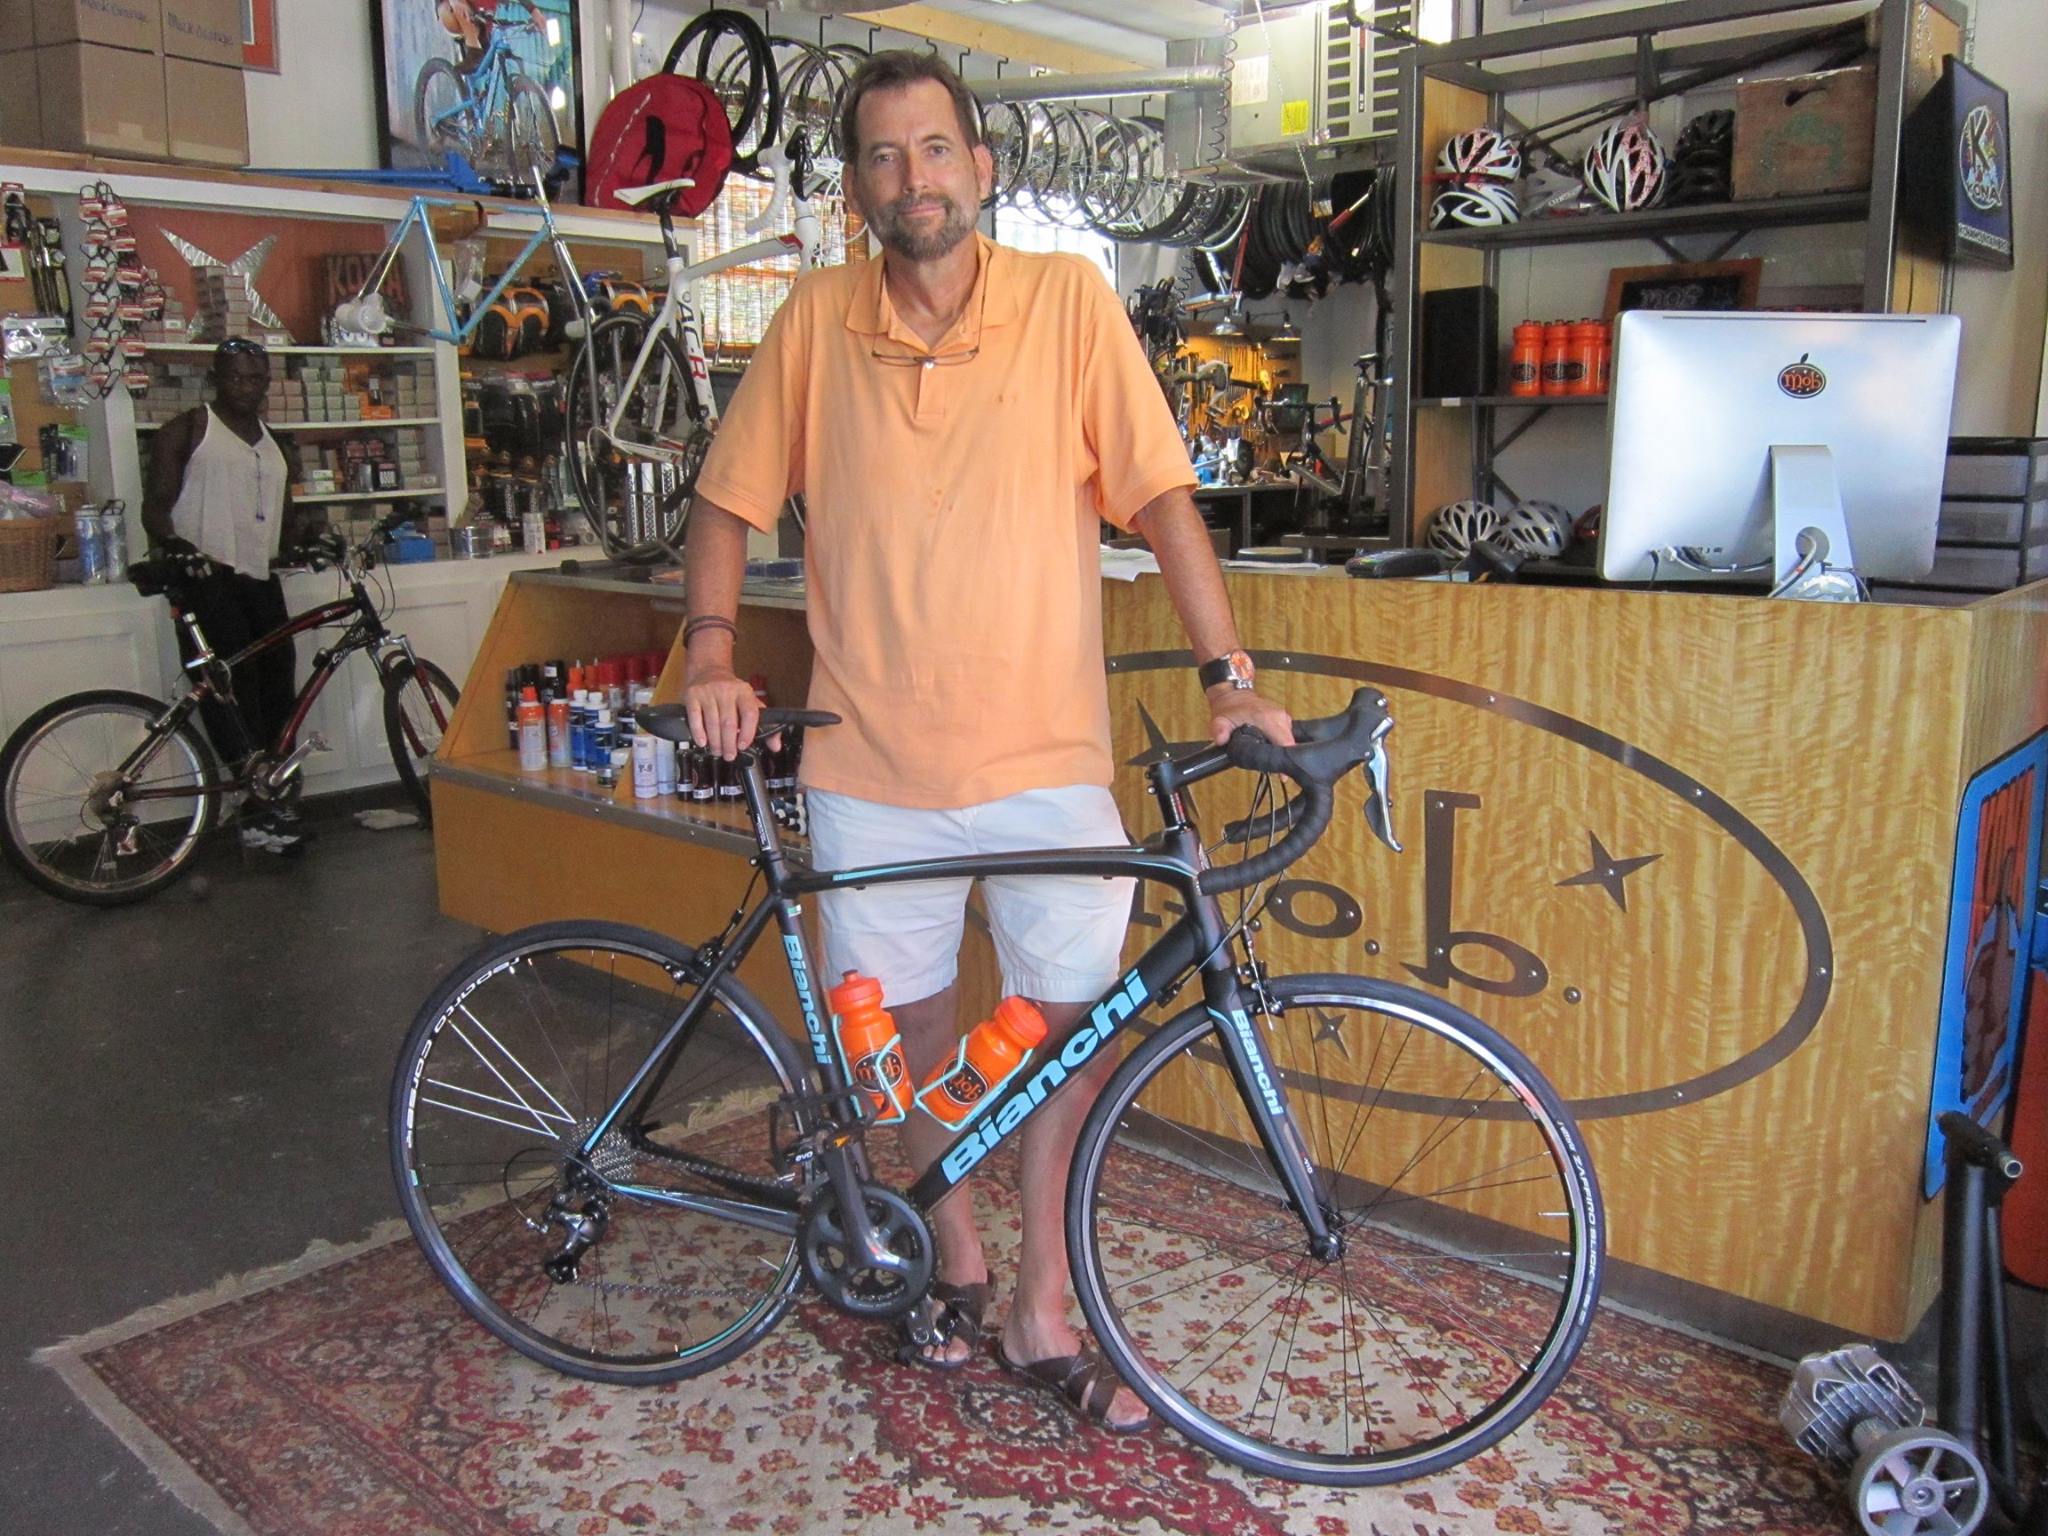 Von with his new Bianchi Impulso. He will enjoy many miles of great riding on his new Bianchi Bicycle. Looking Good!